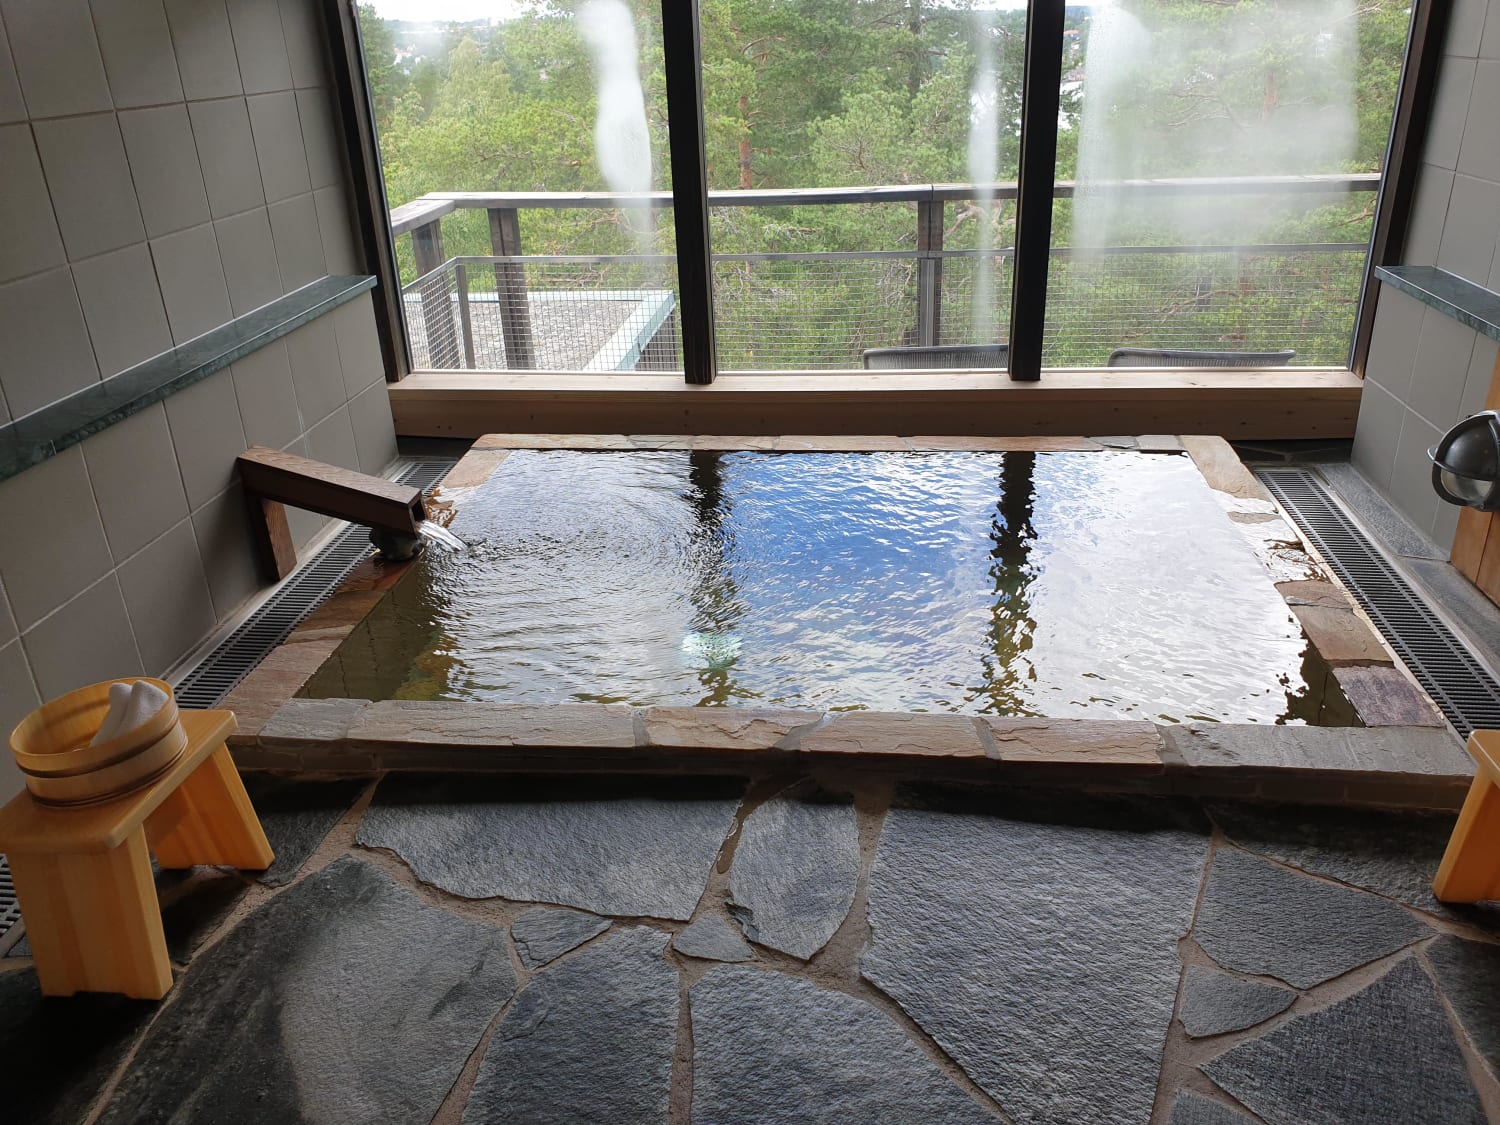 The private onsen at the Japanese spa where me and my boyfriend (now fiancé) had our anniversary